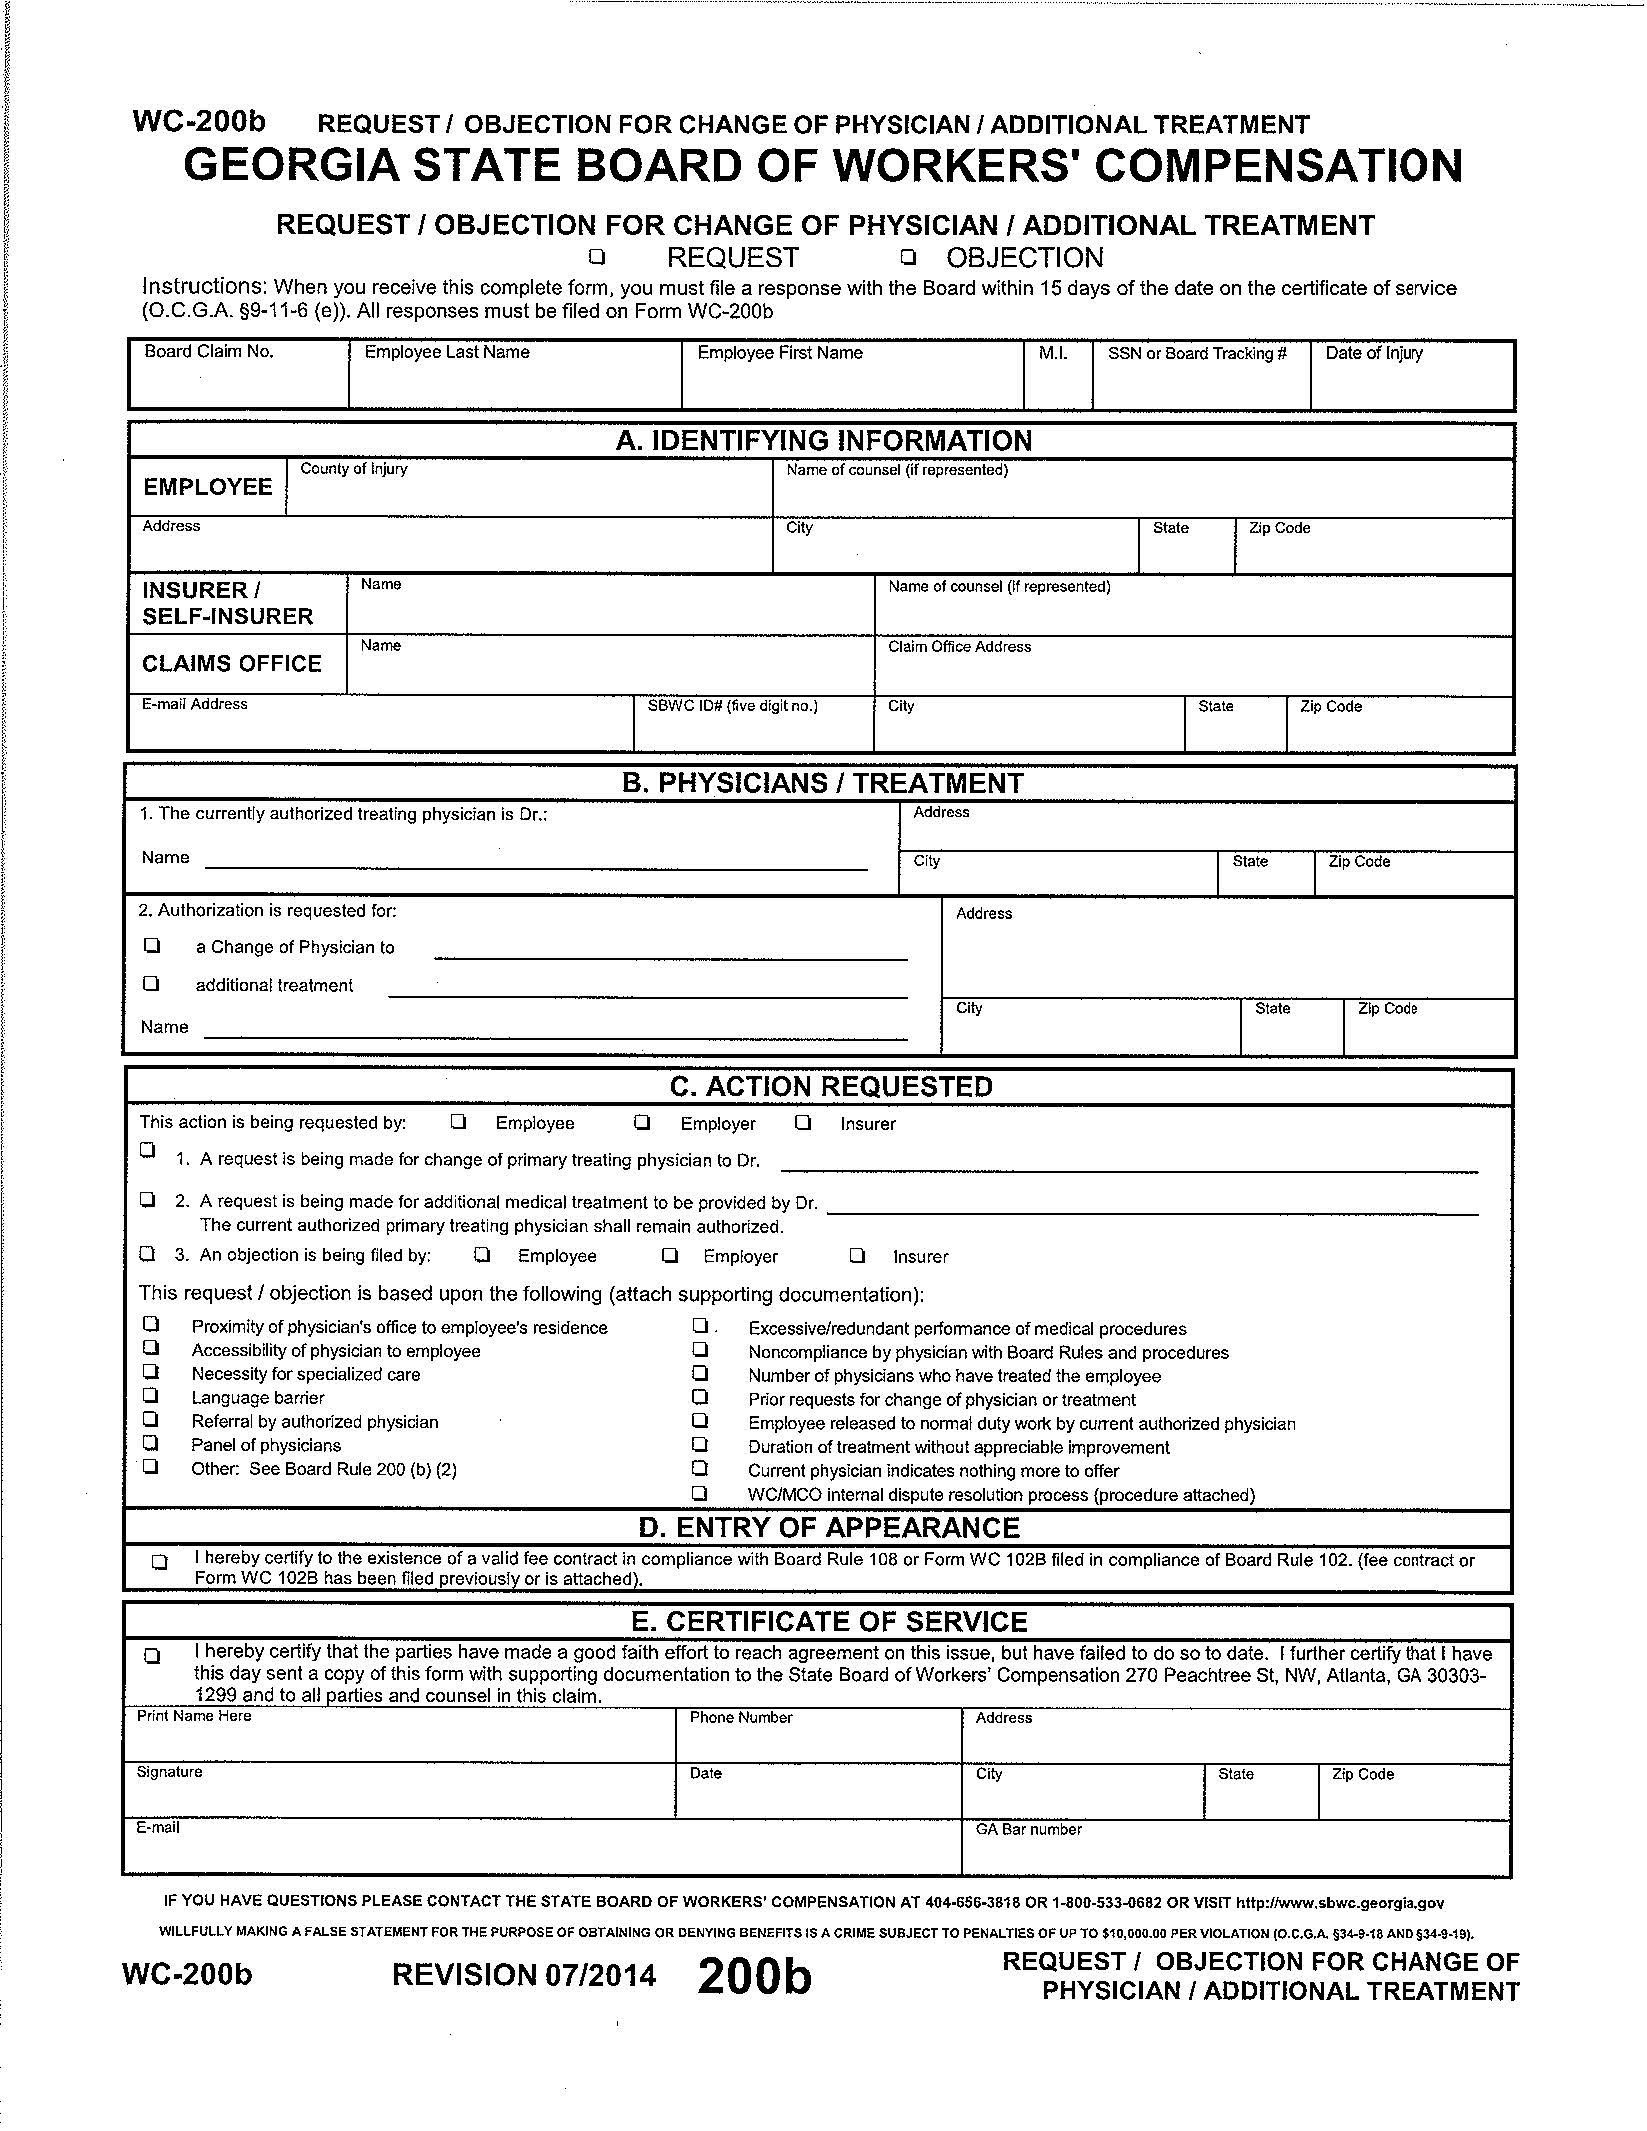 Workers Comp Exemption form Michigan Ga Workers P Medical Treatment forms Wc 200 Wc 205